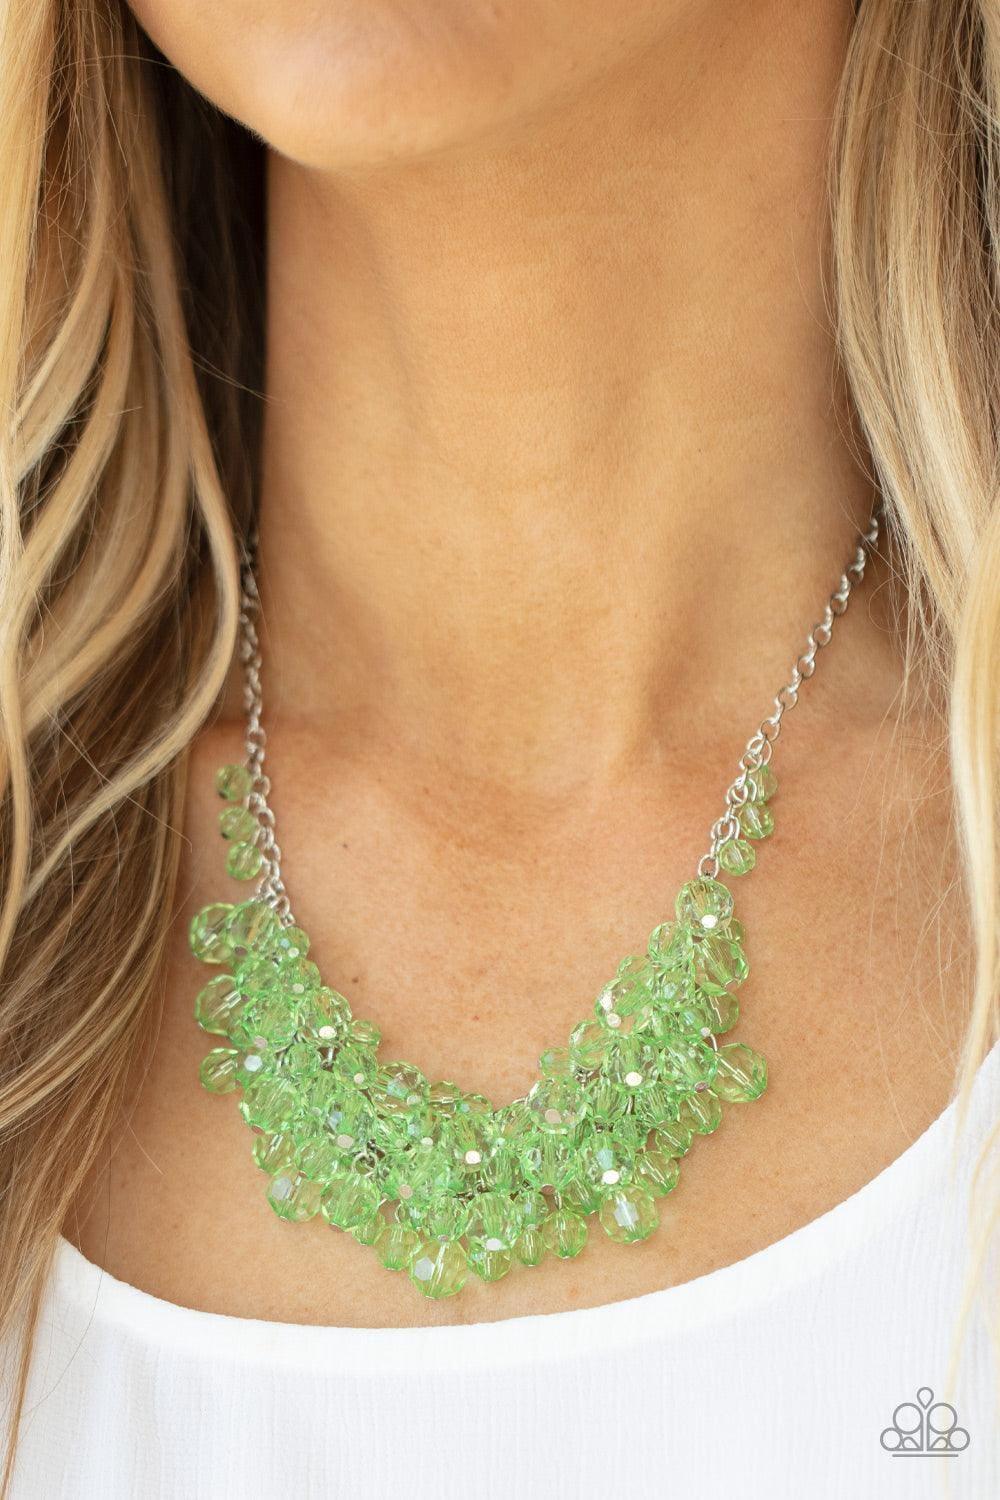 Paparazzi Accessories - Let The Festivities Begin - Green Necklace - Bling by JessieK